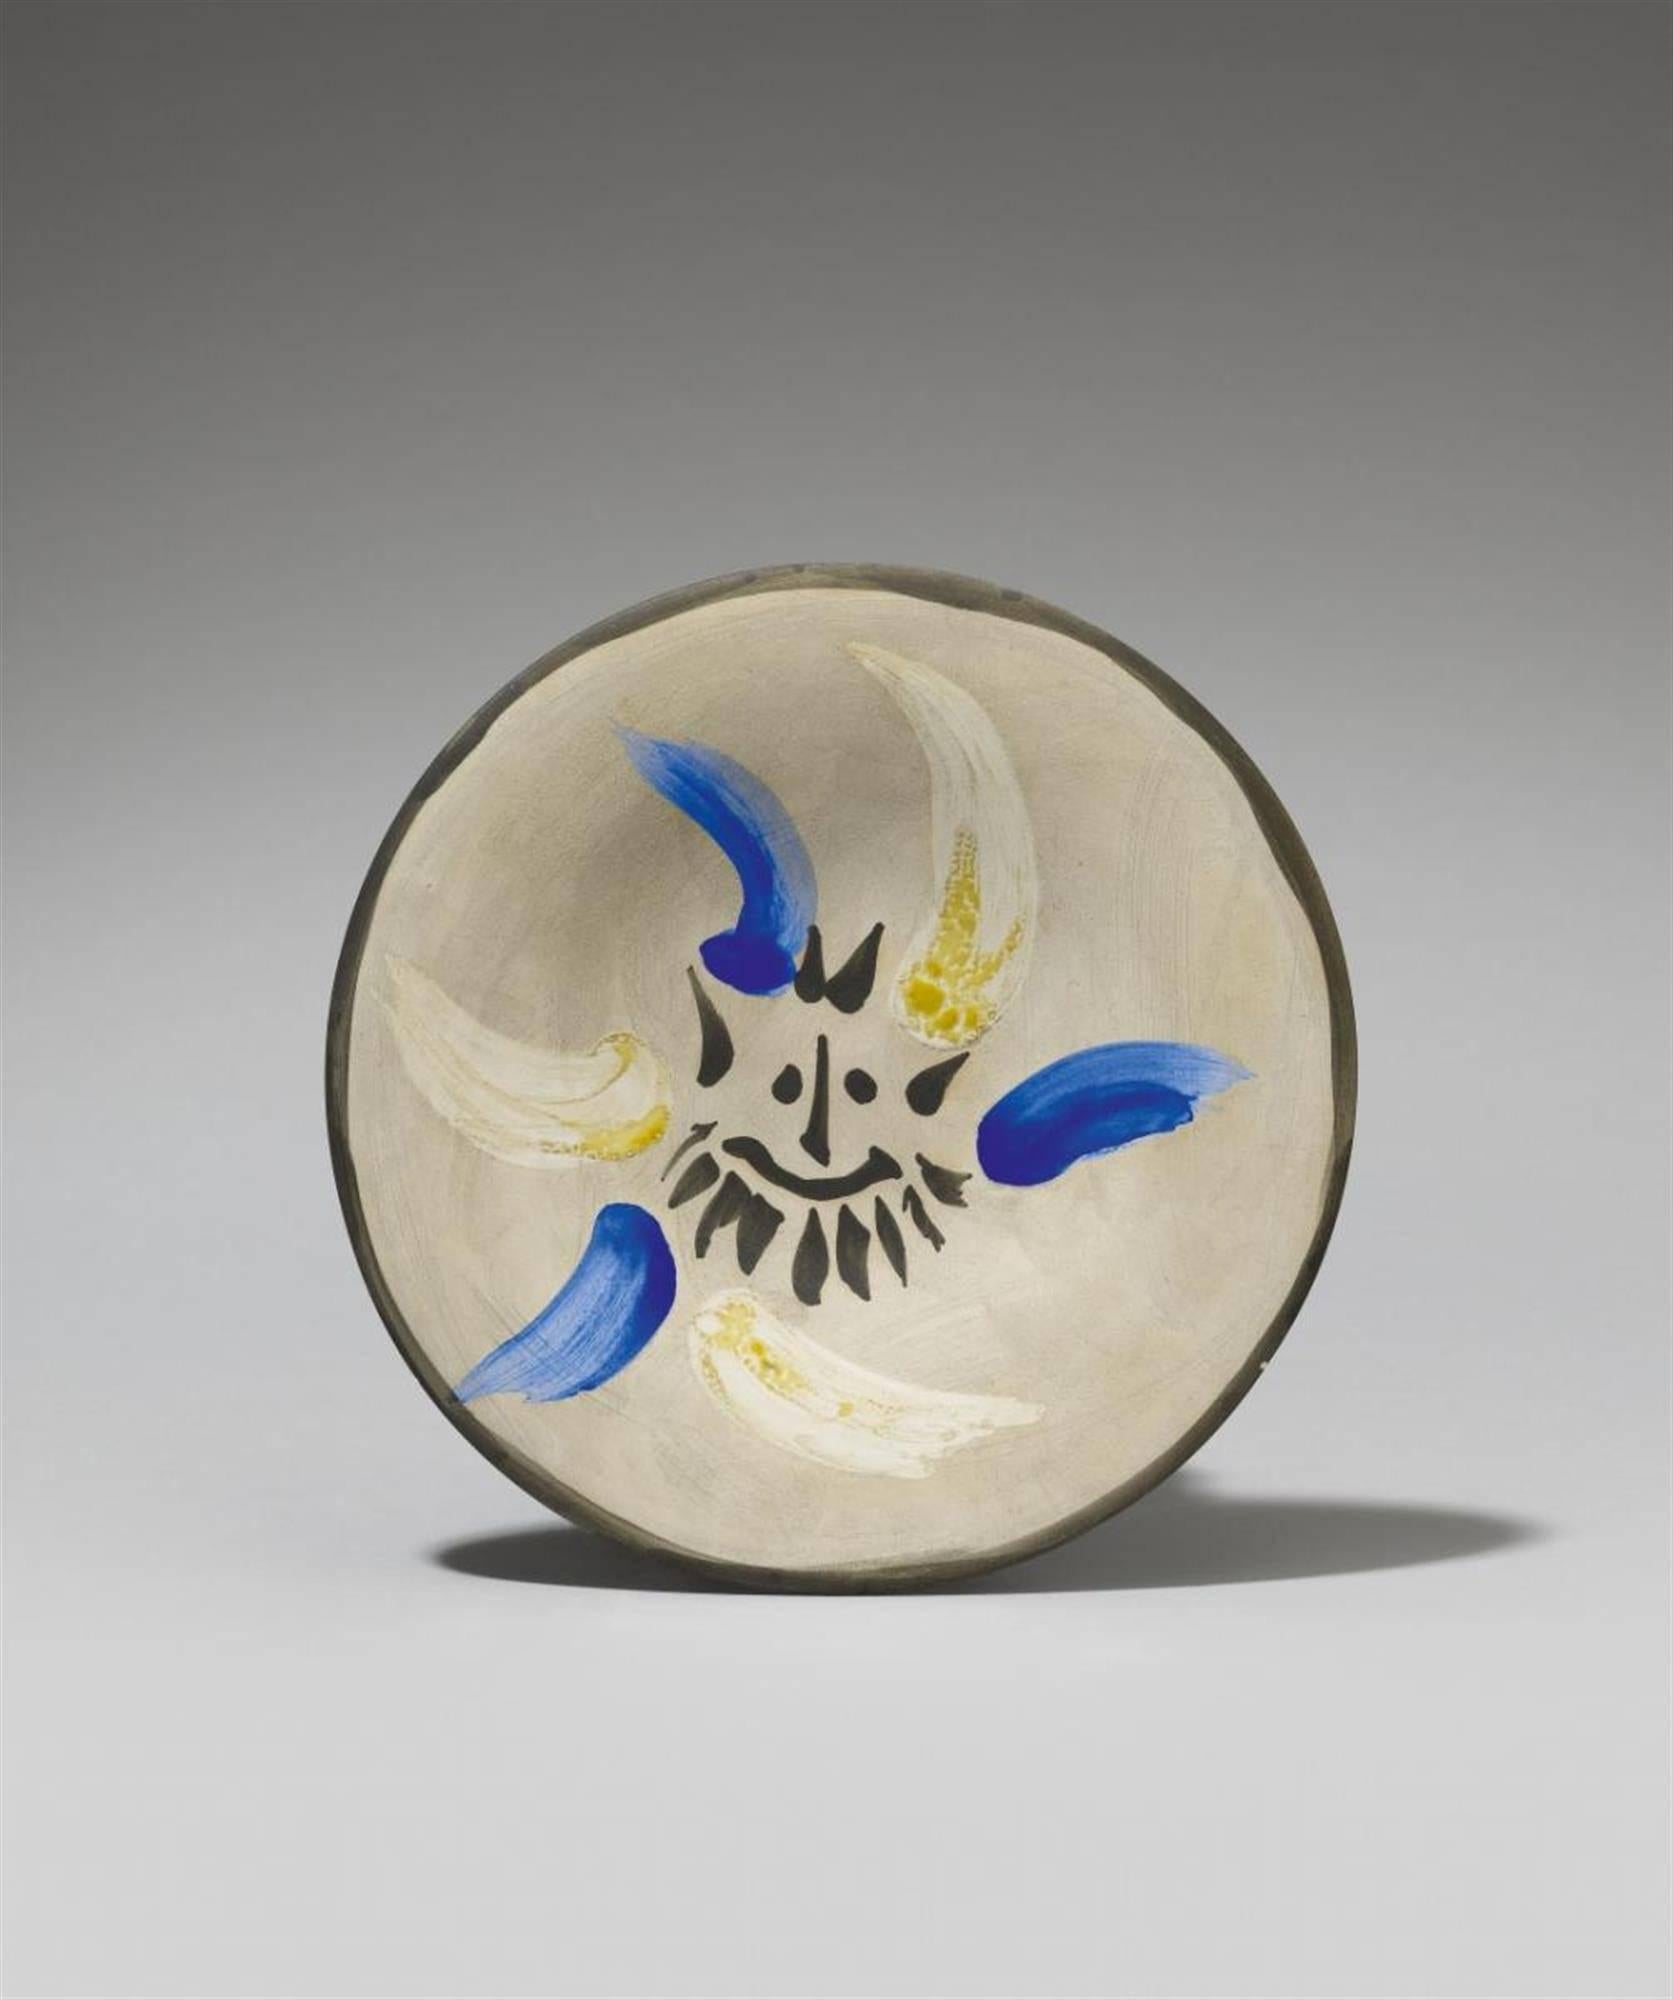 Annotated on the back: Picasso edition; Madoura; 46/150; n°12
Ramié, A., Catalogue of the edited ceramic works, n° 460, p. 242.